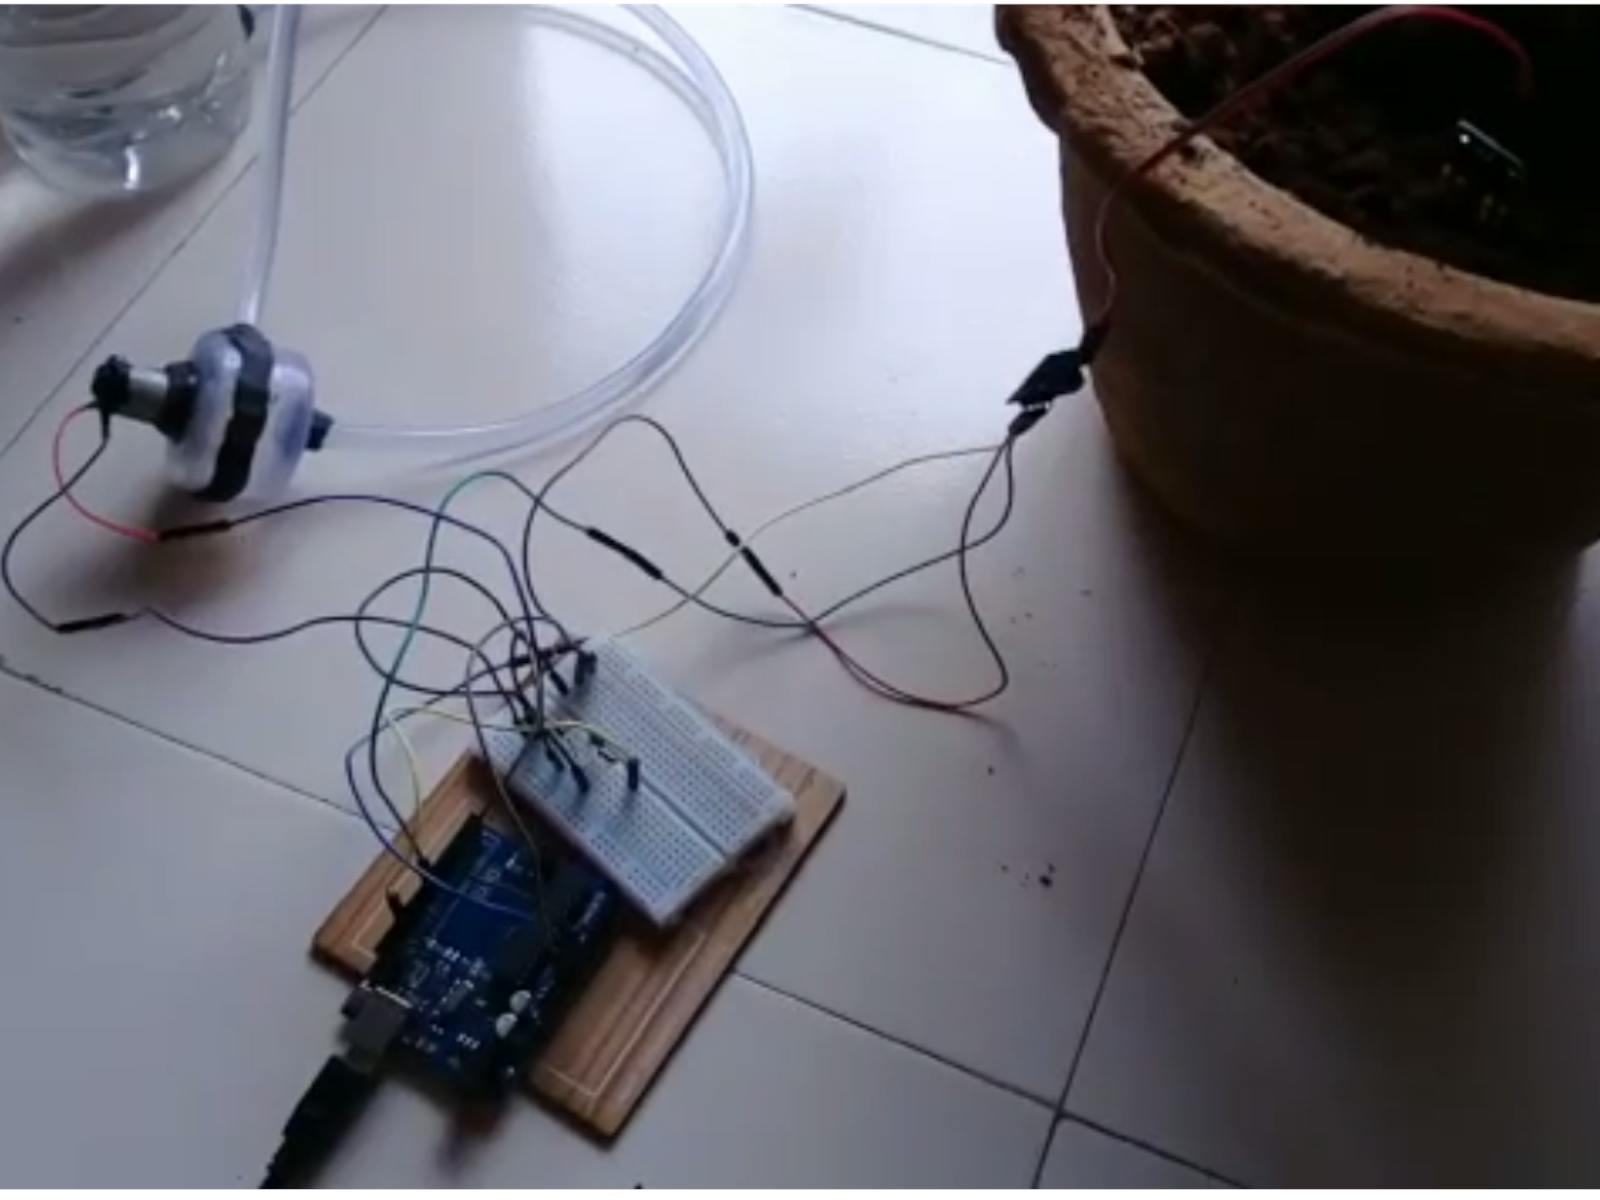 Automatic Watering System Using Arduino Uno - Hackster.io